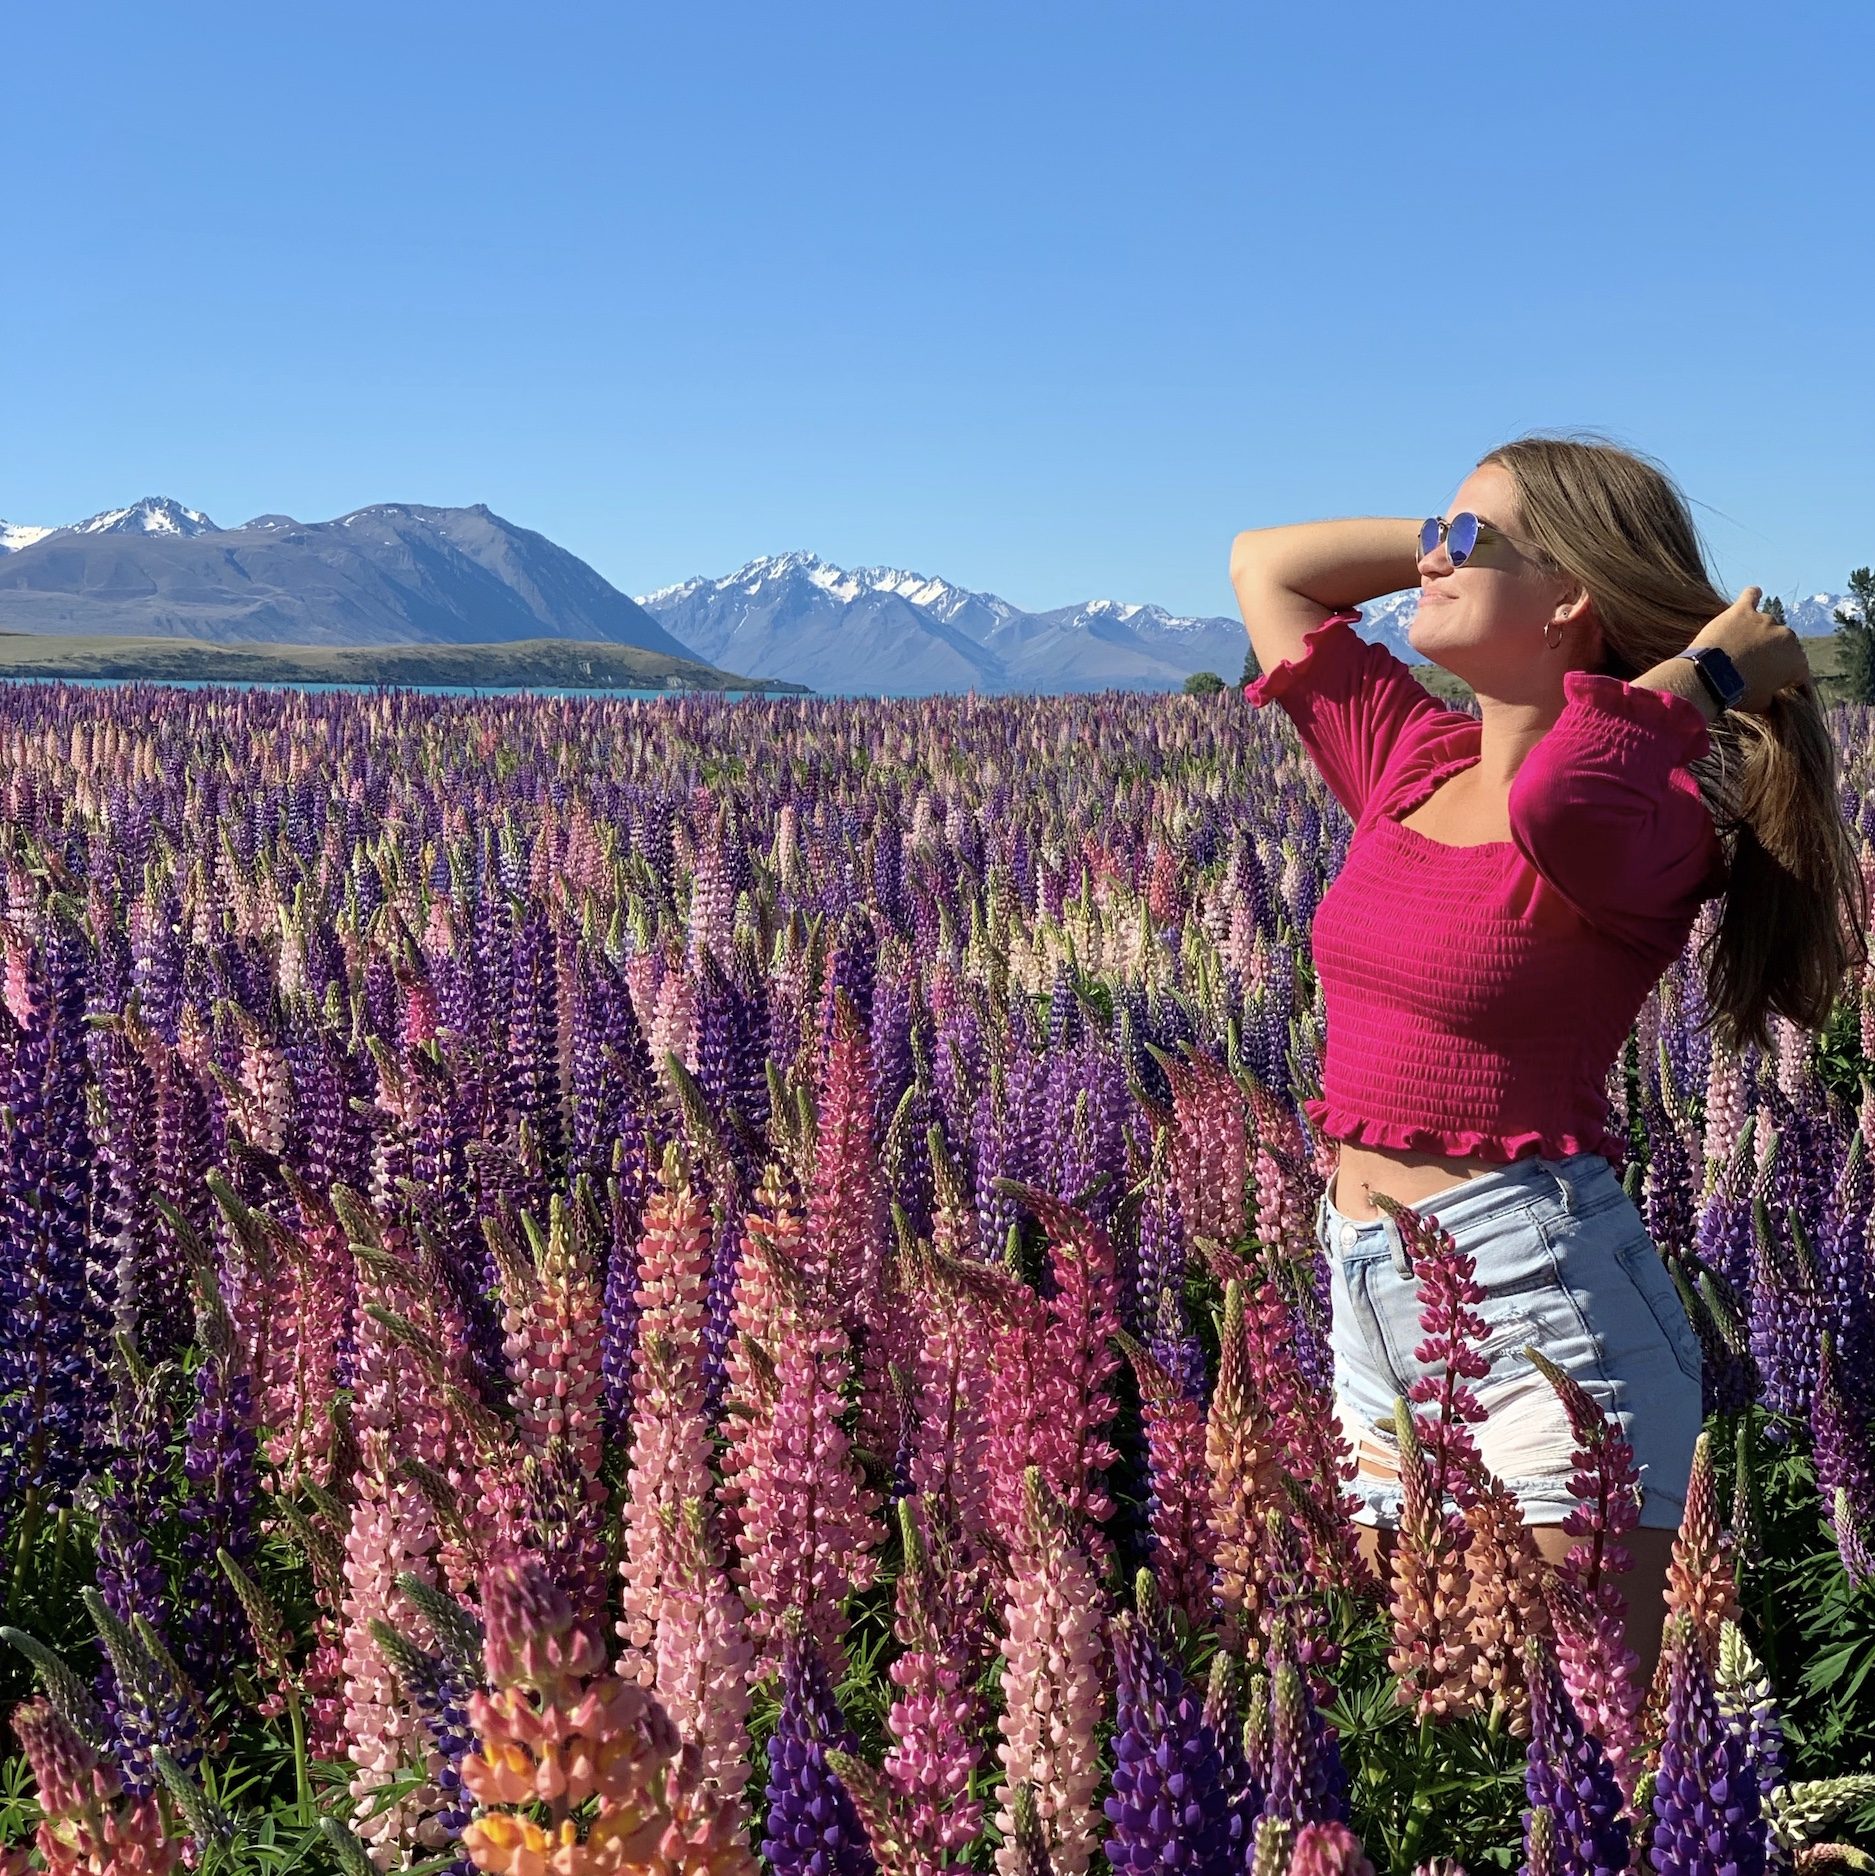 where to see lupins south island: niki poses in a field of lupins